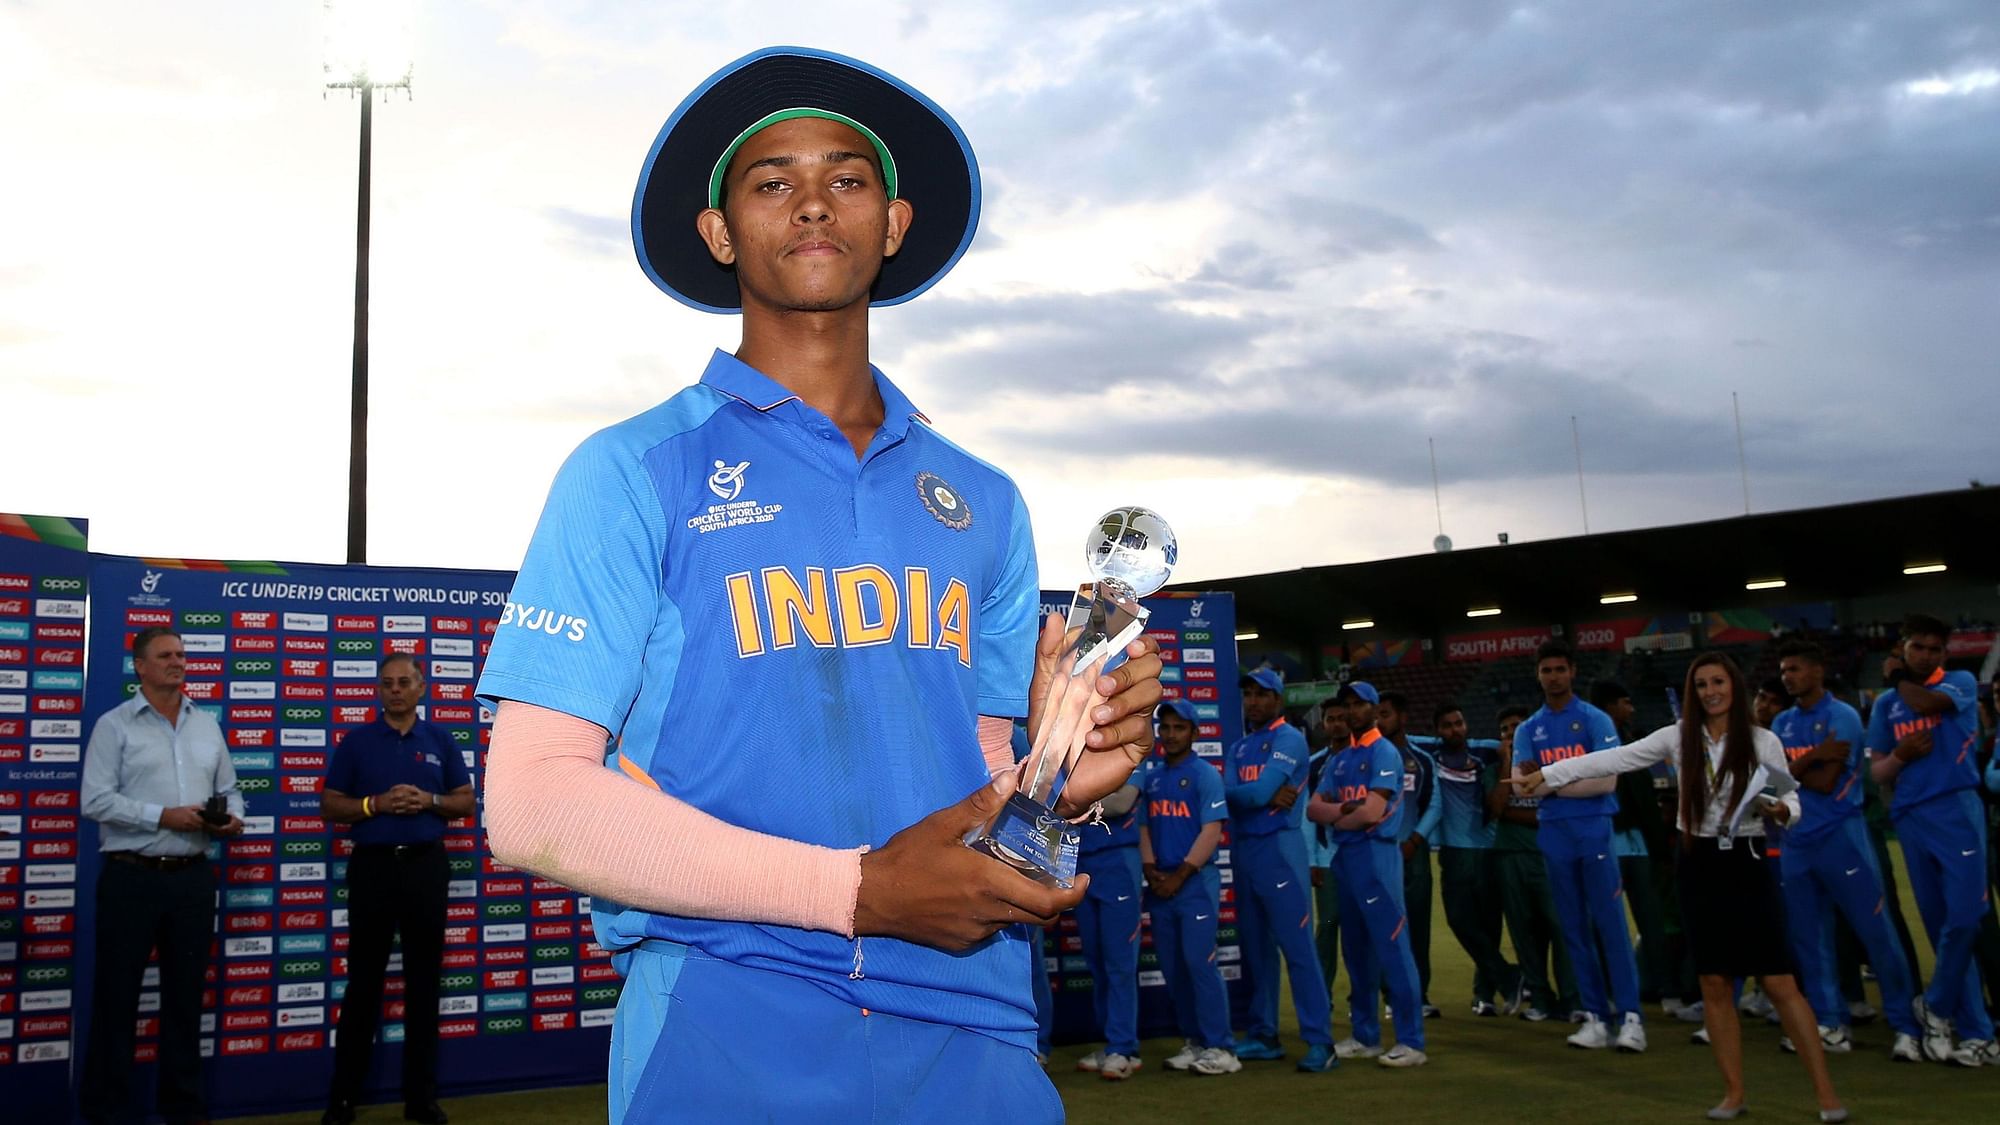 Yashasvi was adjudged Player of the Tournament for the 400 runs he scored from 6 innings.&nbsp;